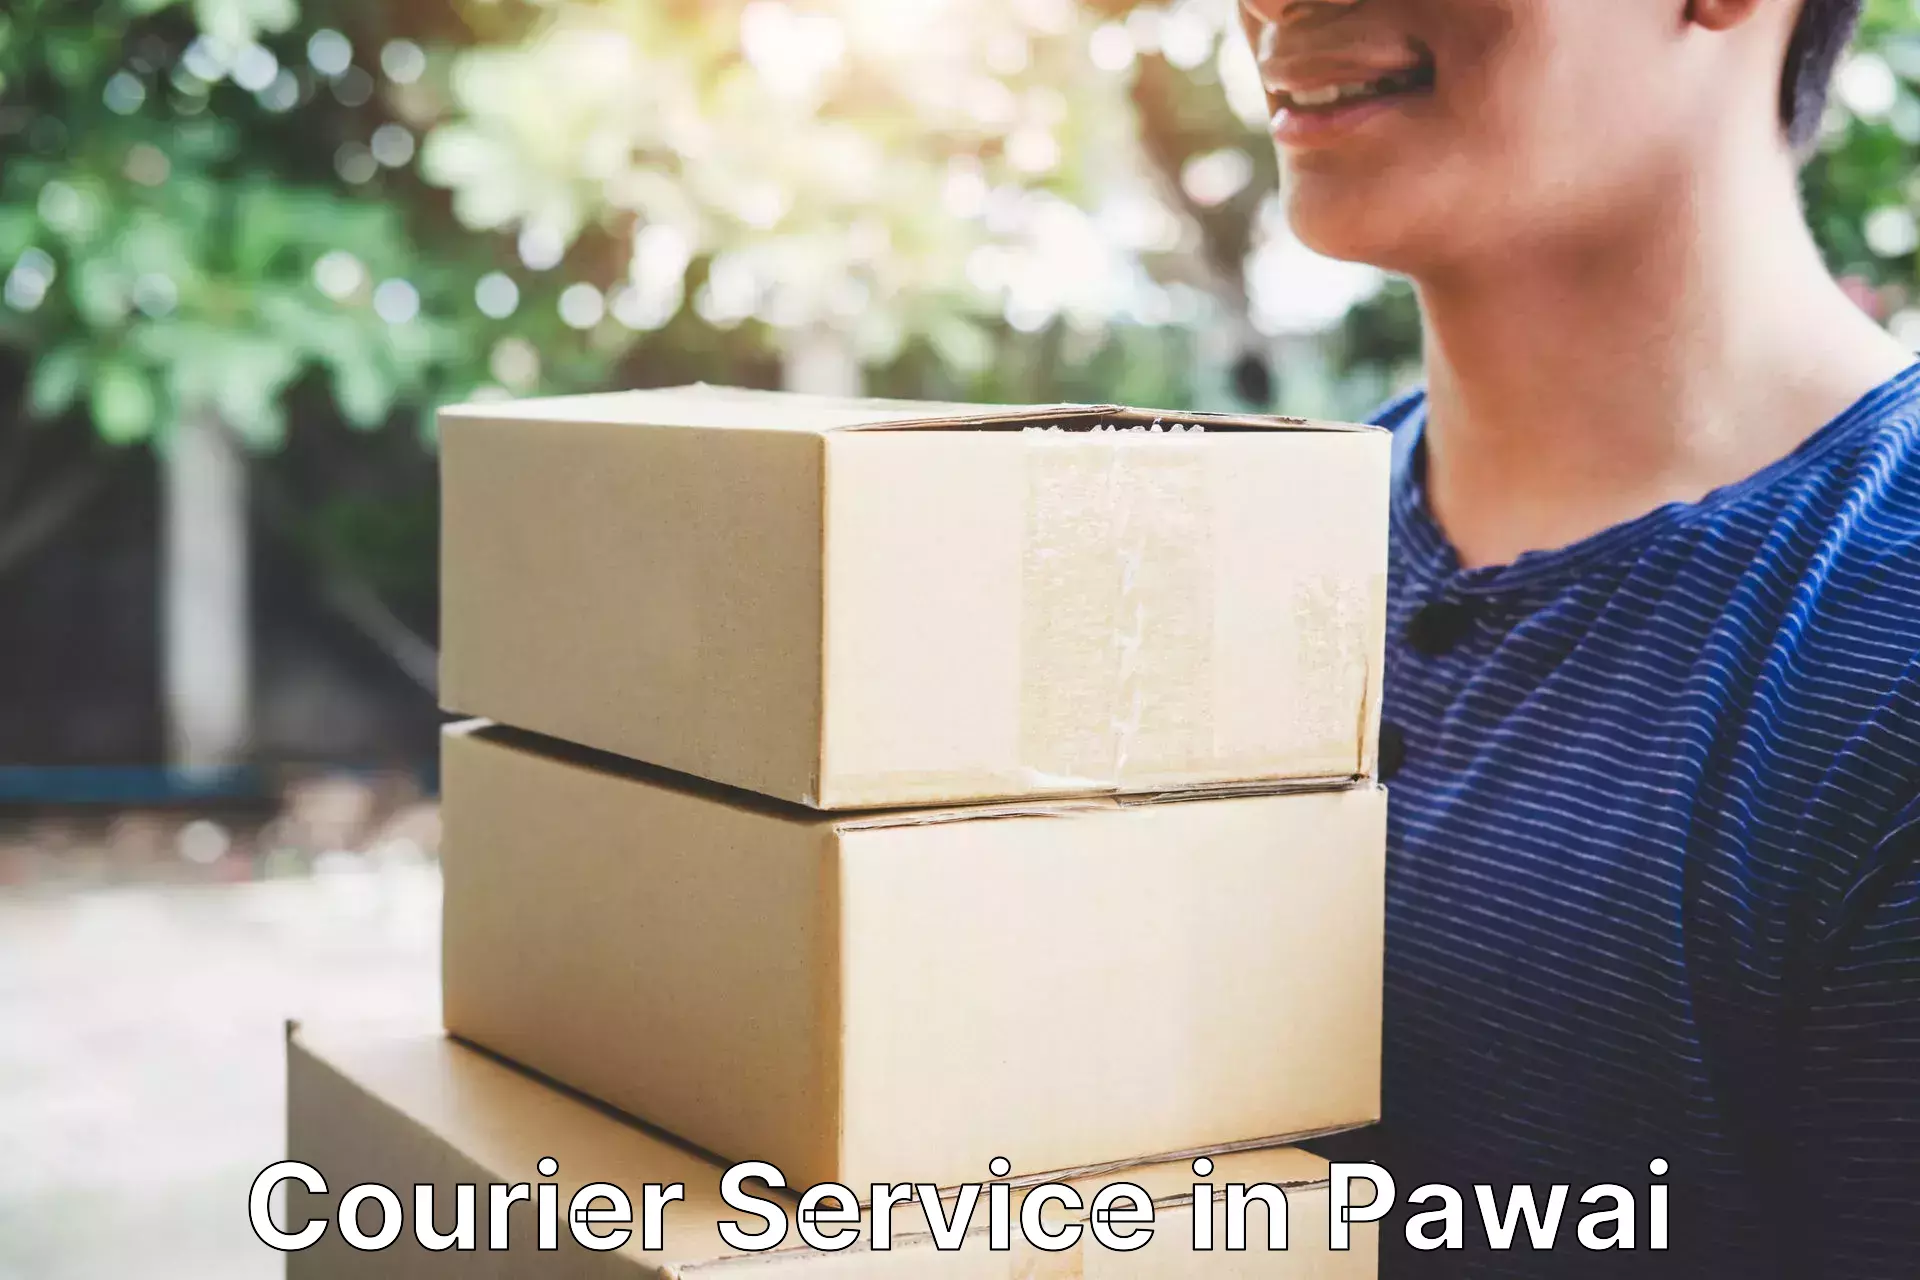 Courier rate comparison in Pawai